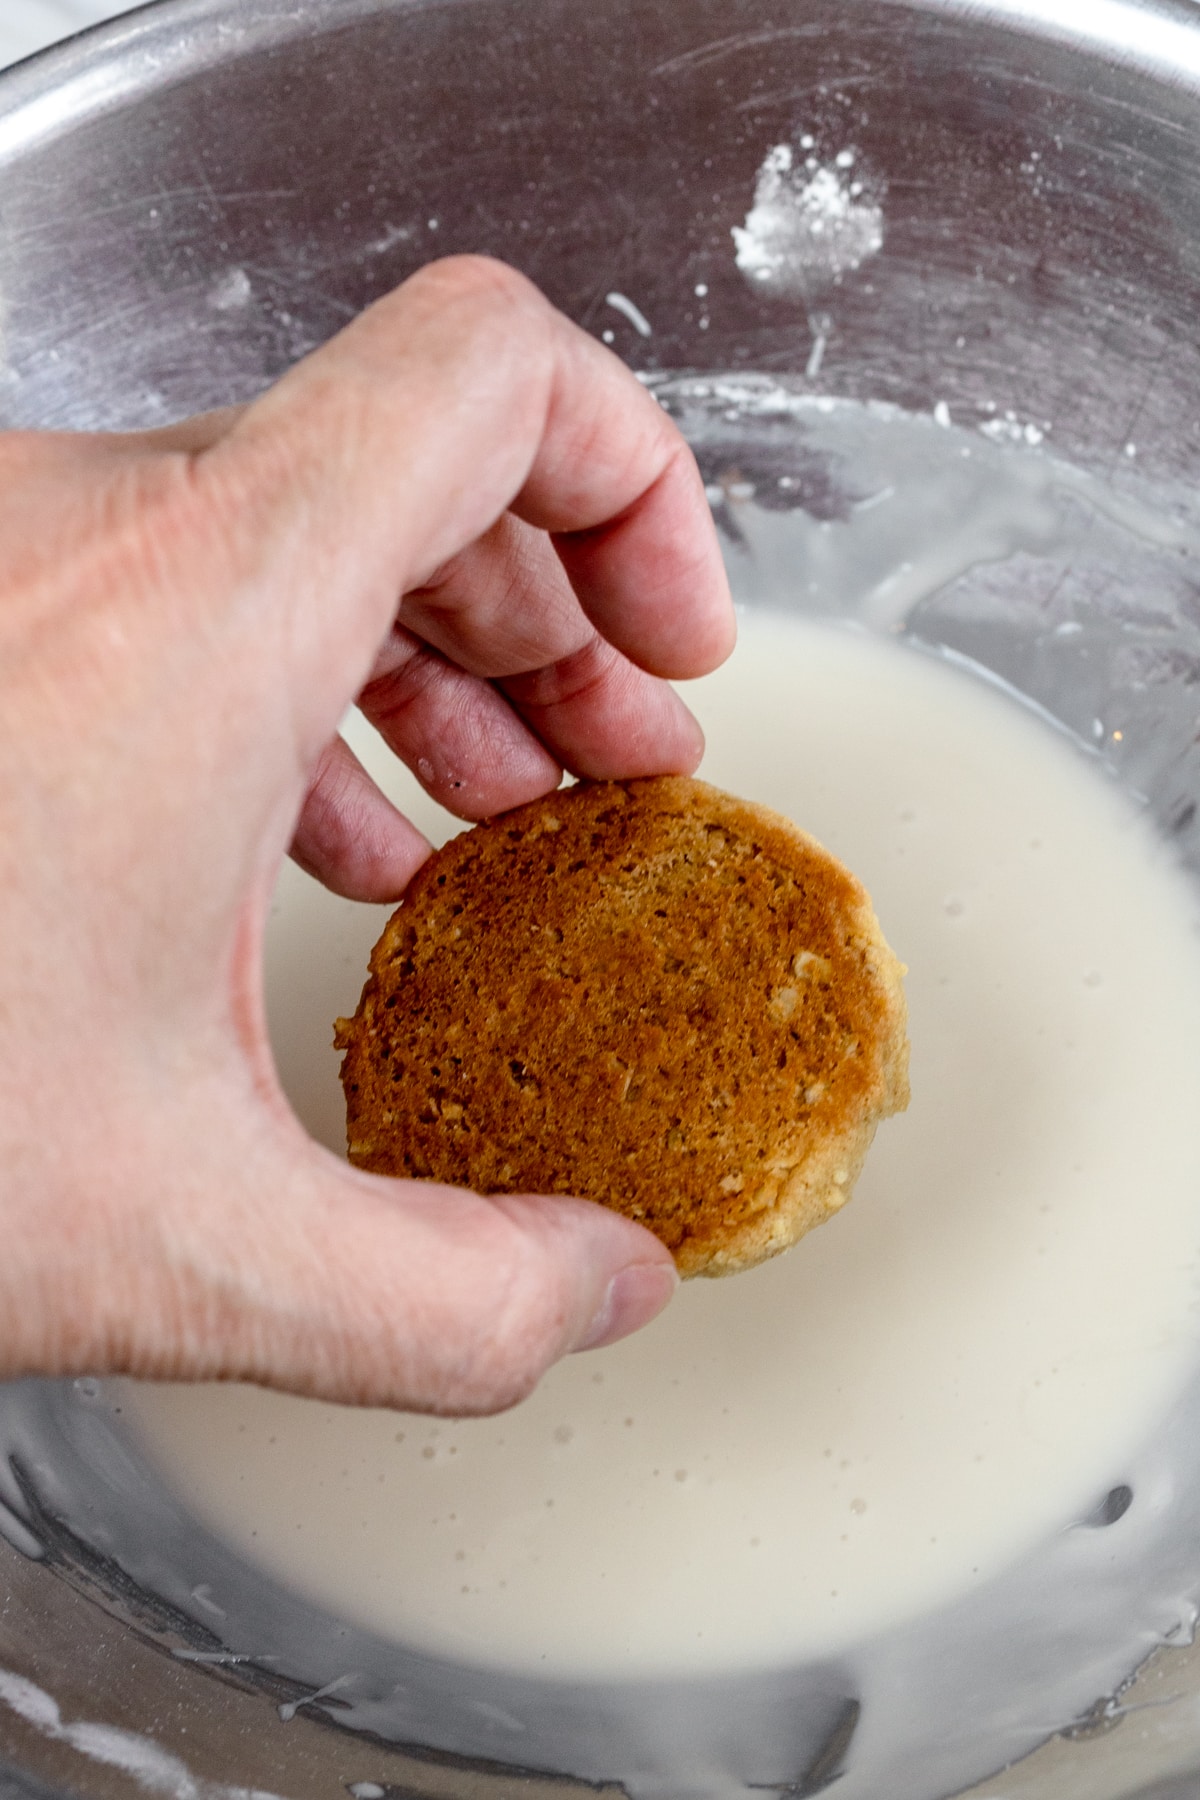 Top view of an oatmeal cookie being dunked into a bowl of icing to get icing on the top of the cookie.s.